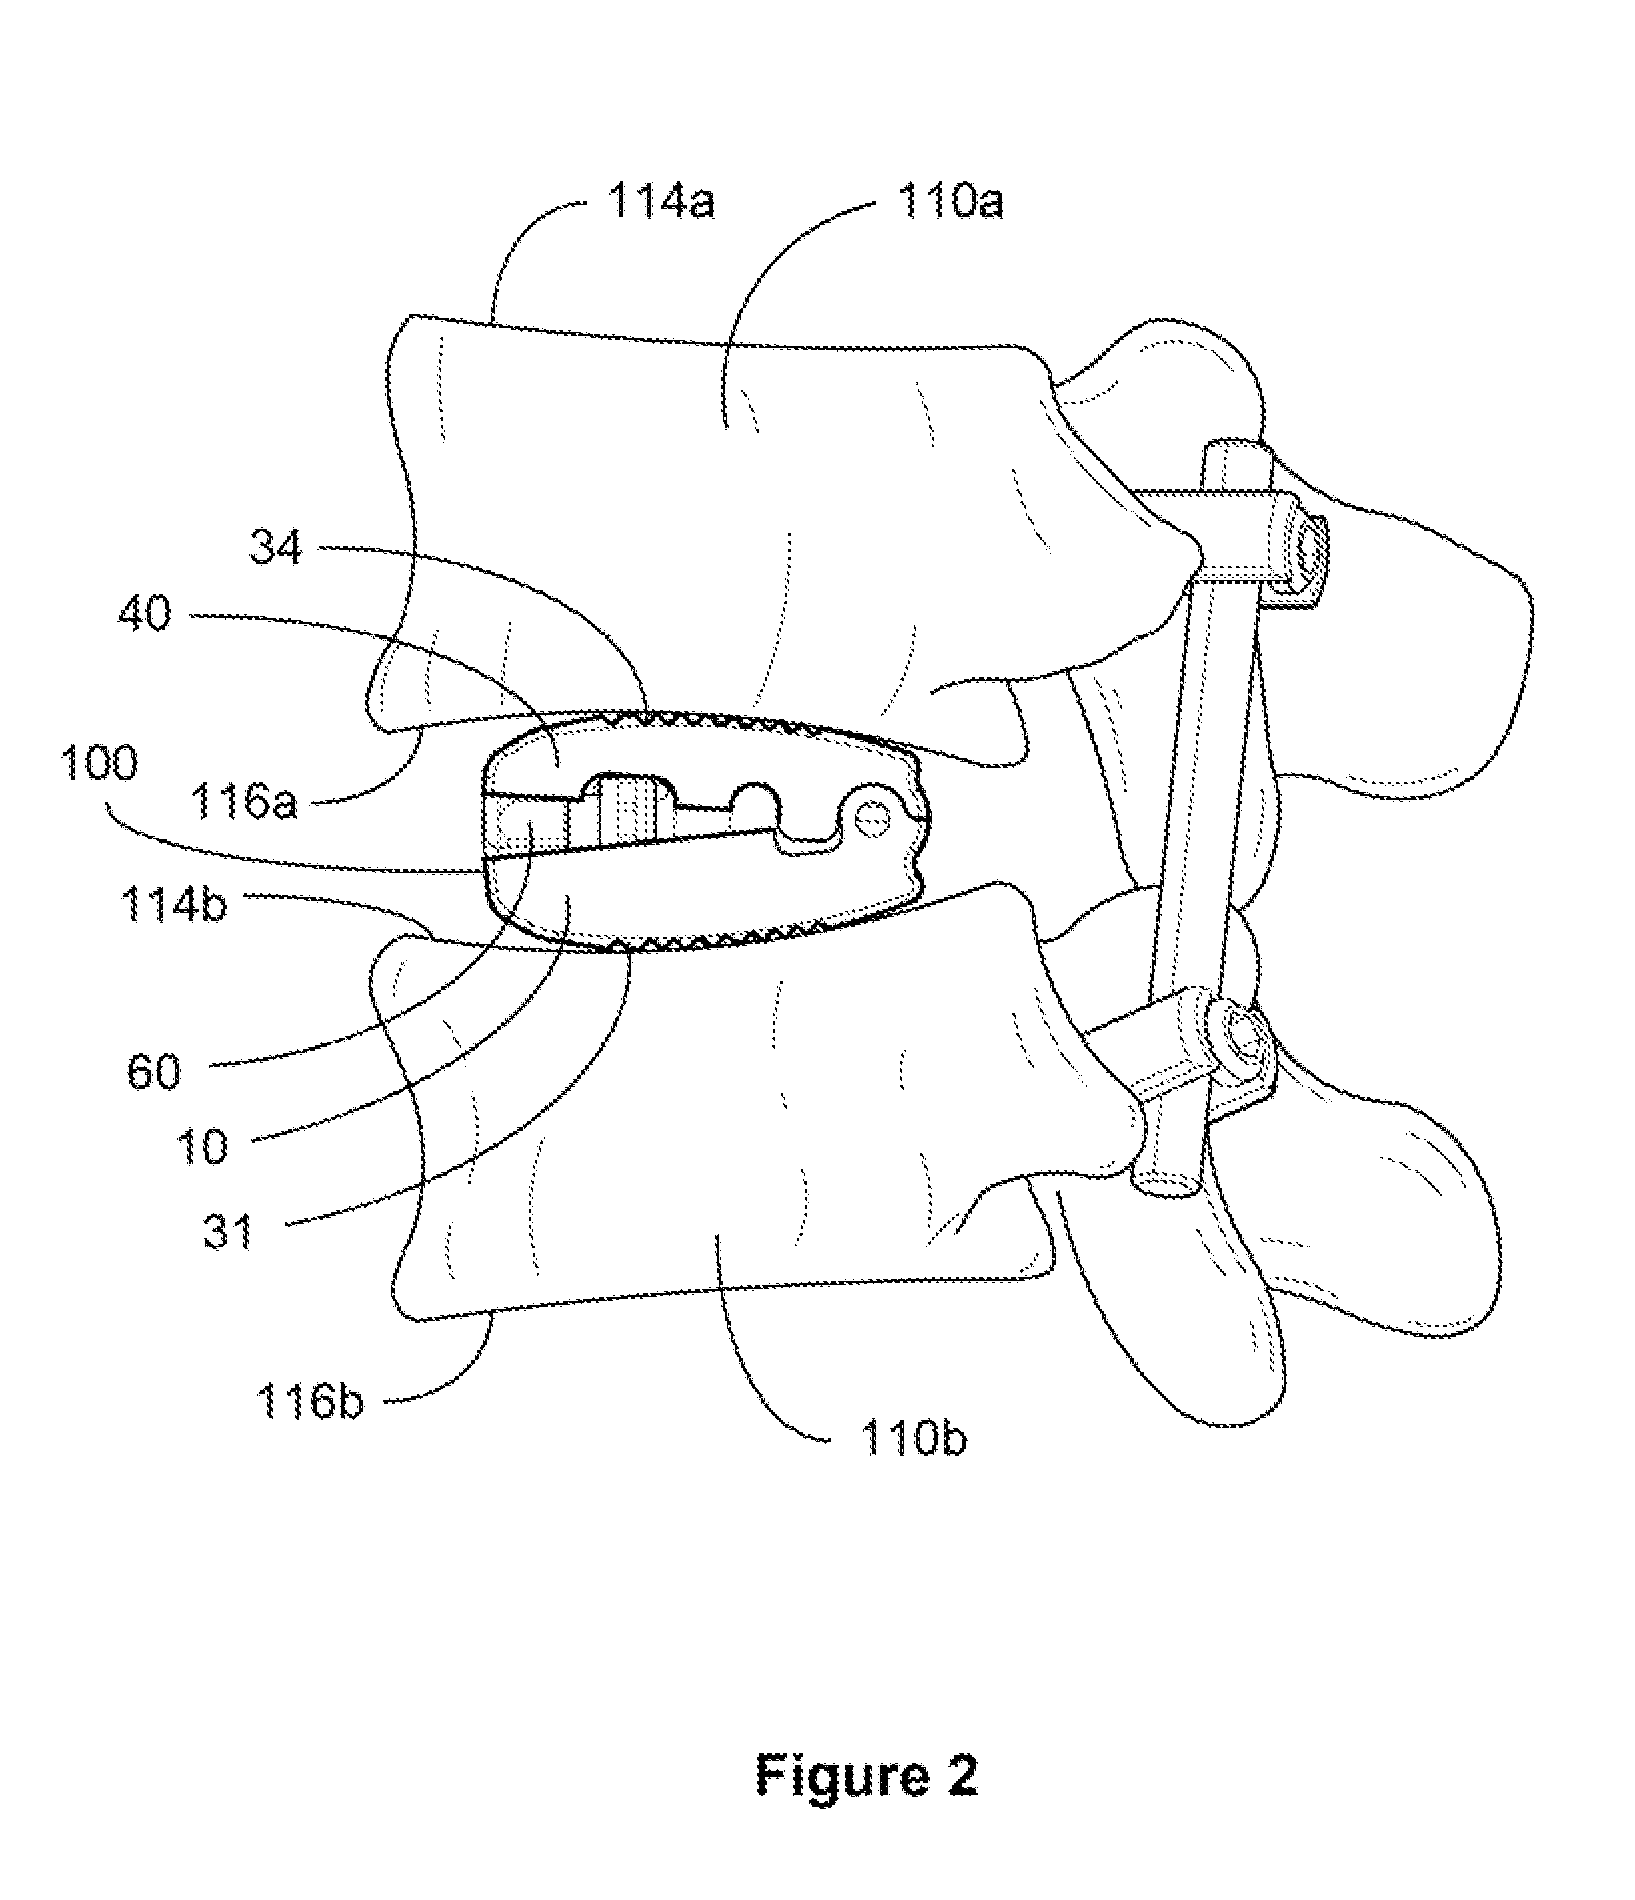 Bone Cage with Components for Controlled Expansion